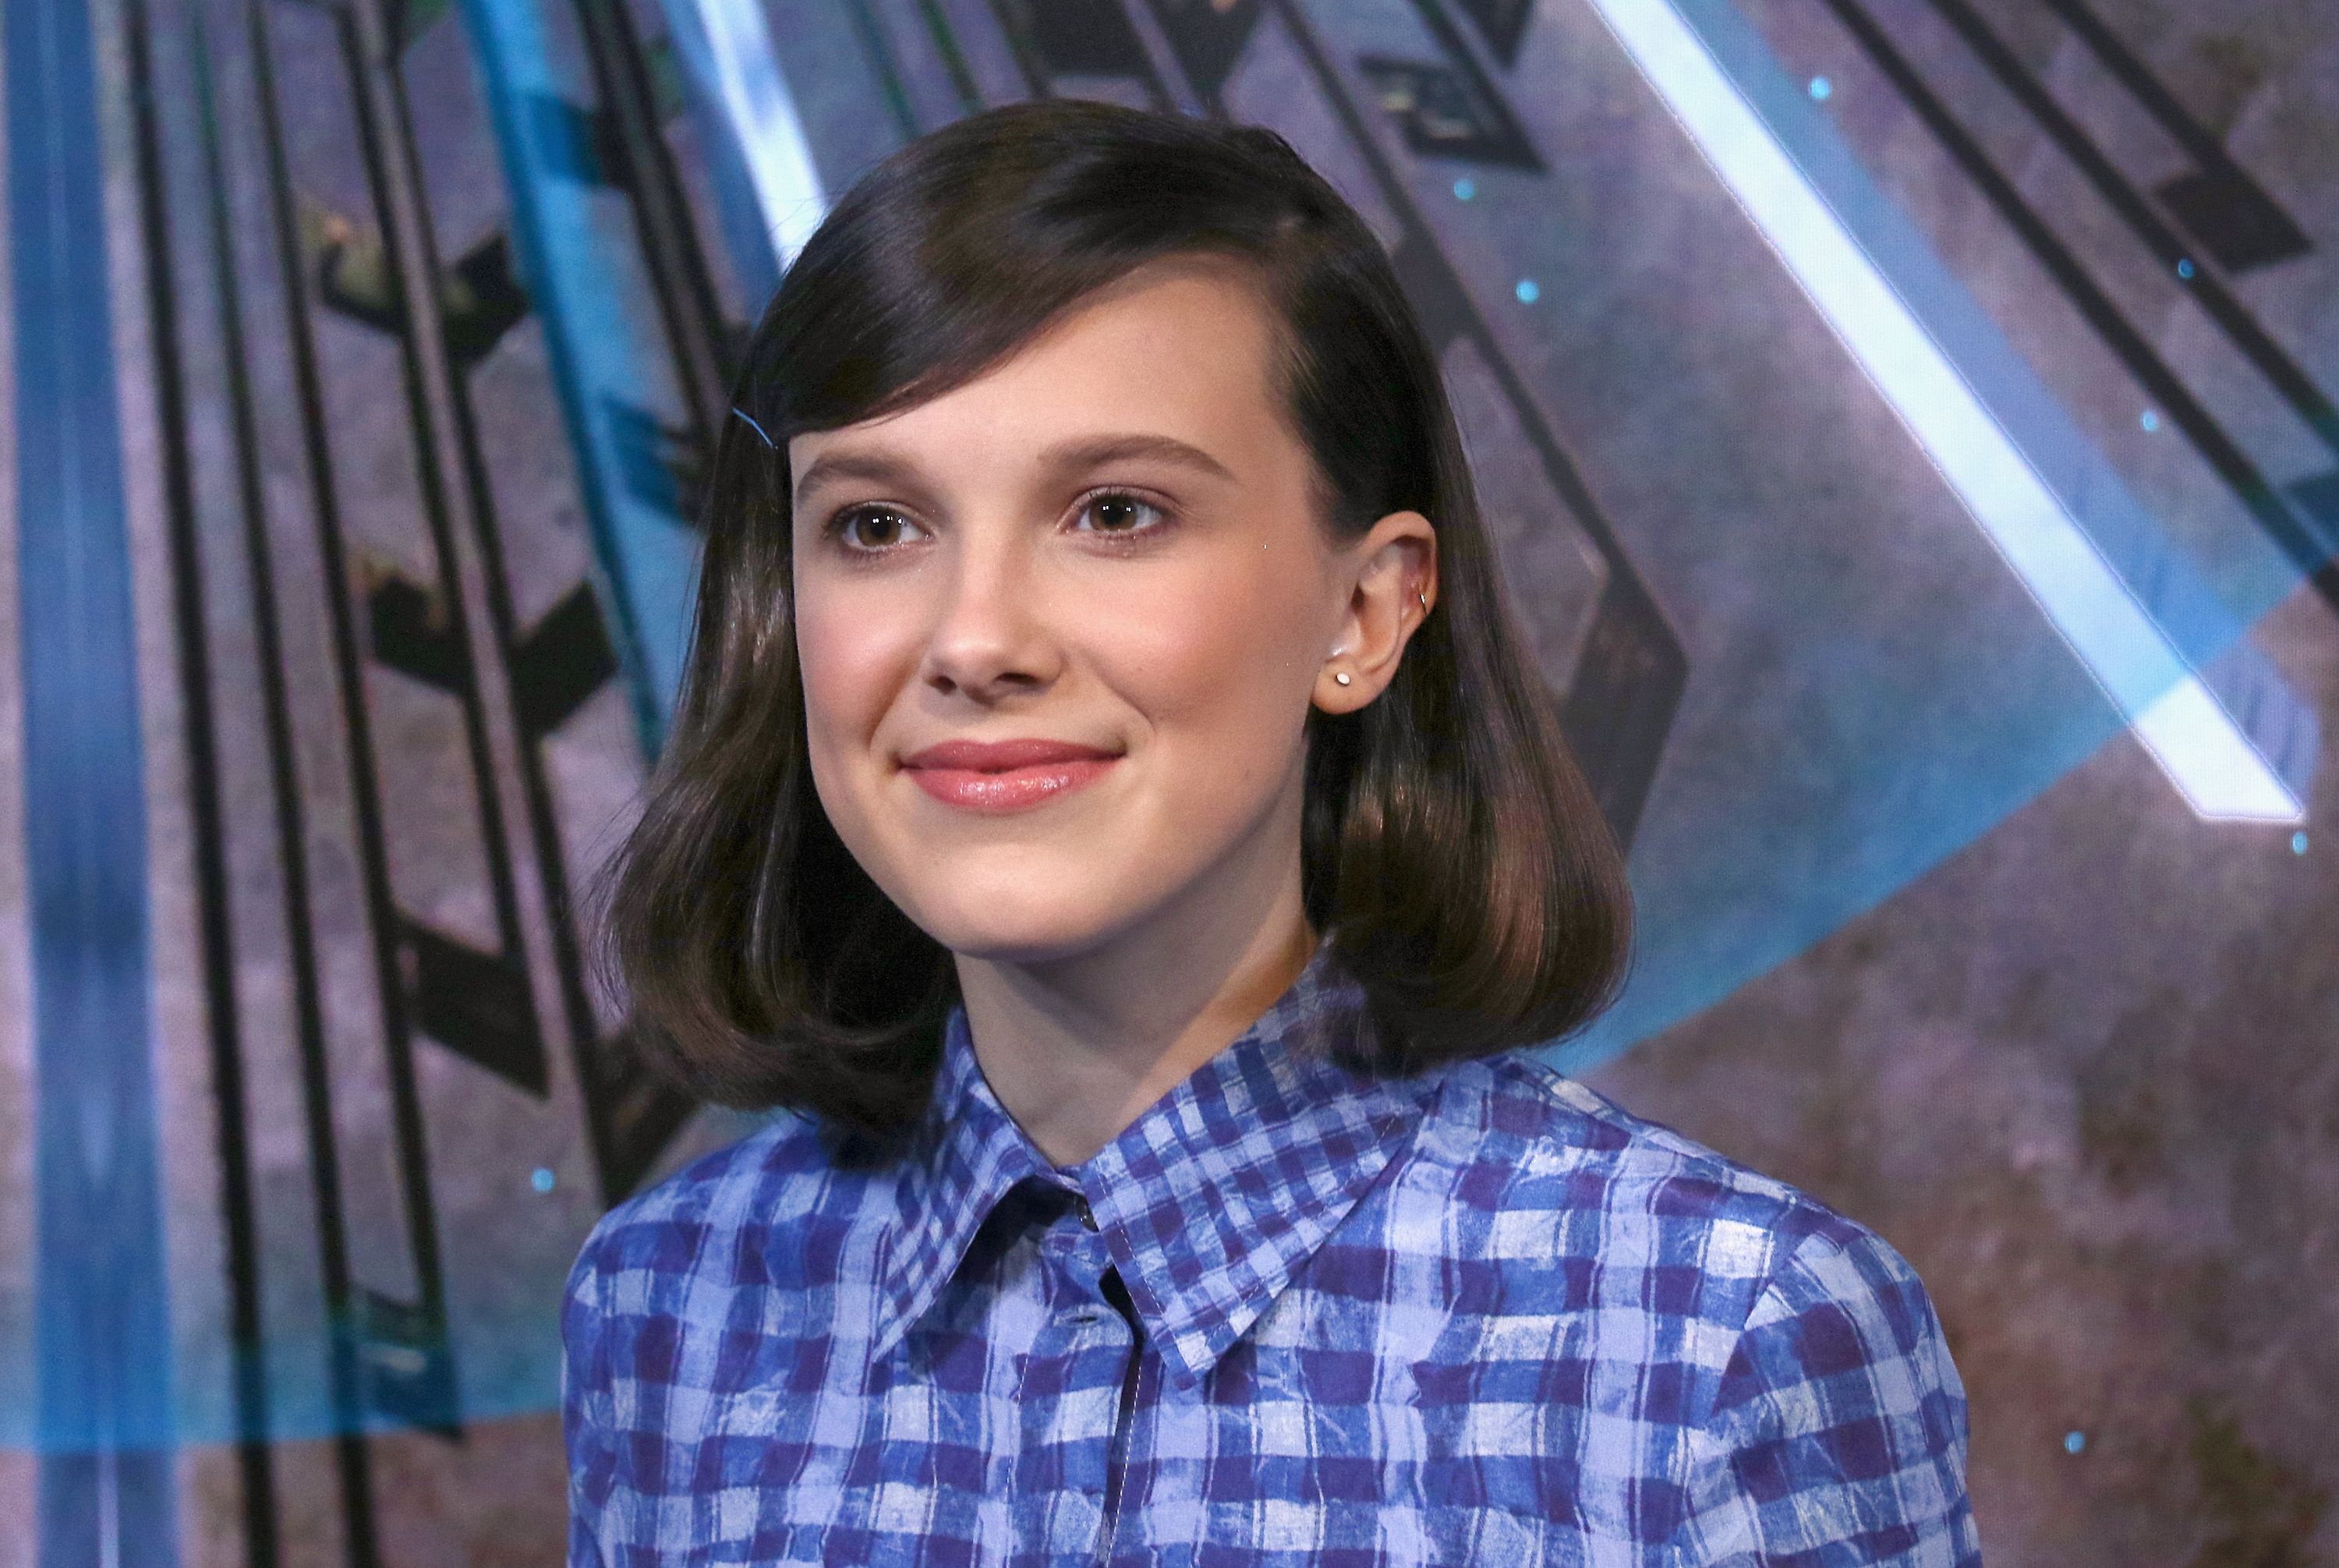 Millie Bobby Brown Now Has Blonde Hair for Fall 2019